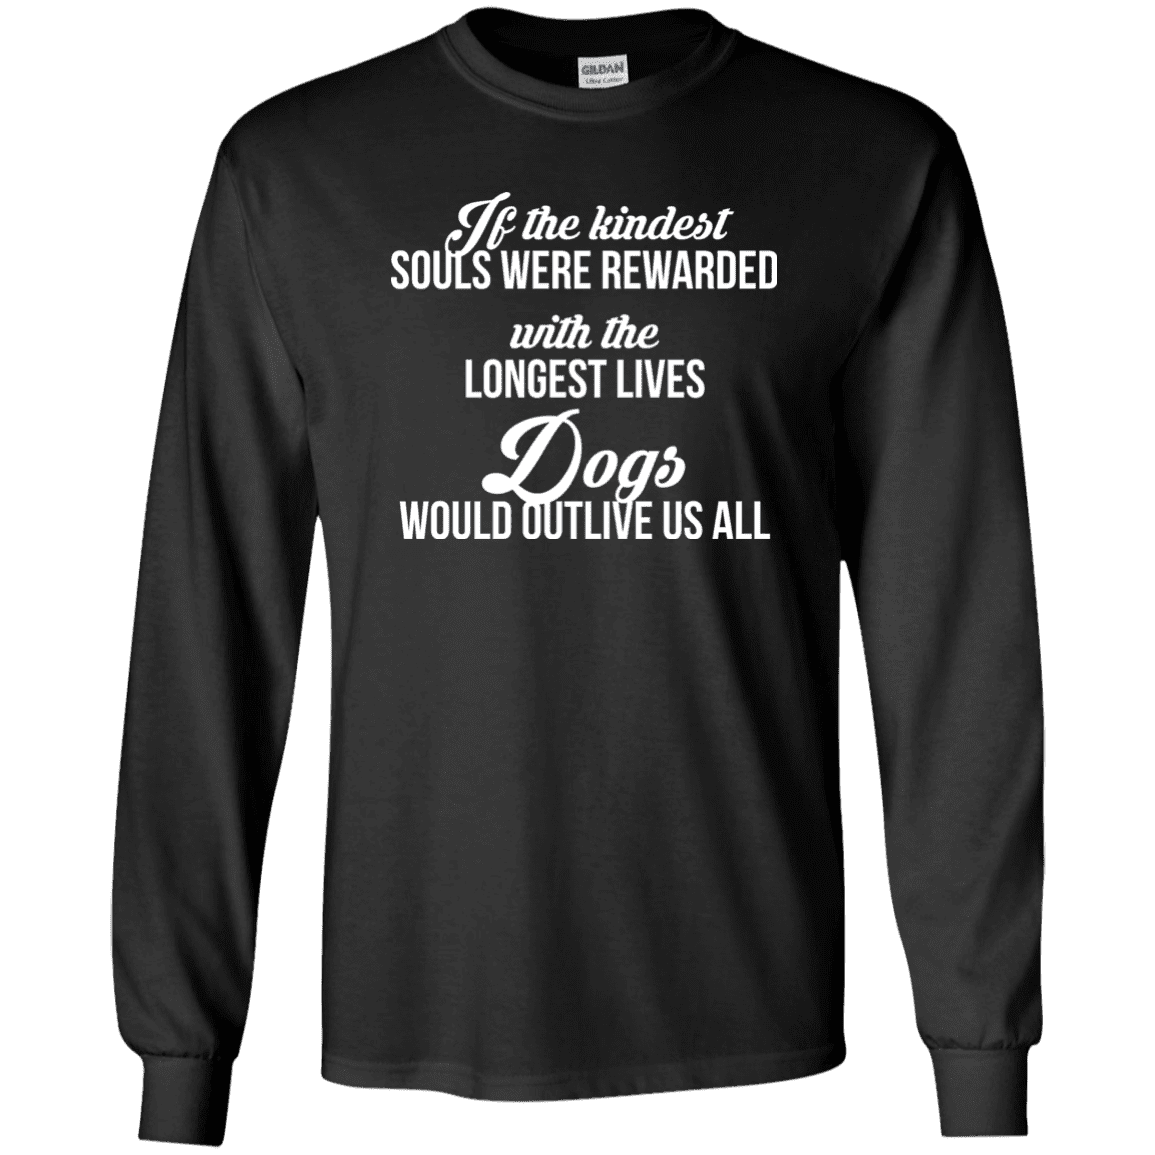 If The Kindest Souls - Long Sleeve T Shirt.